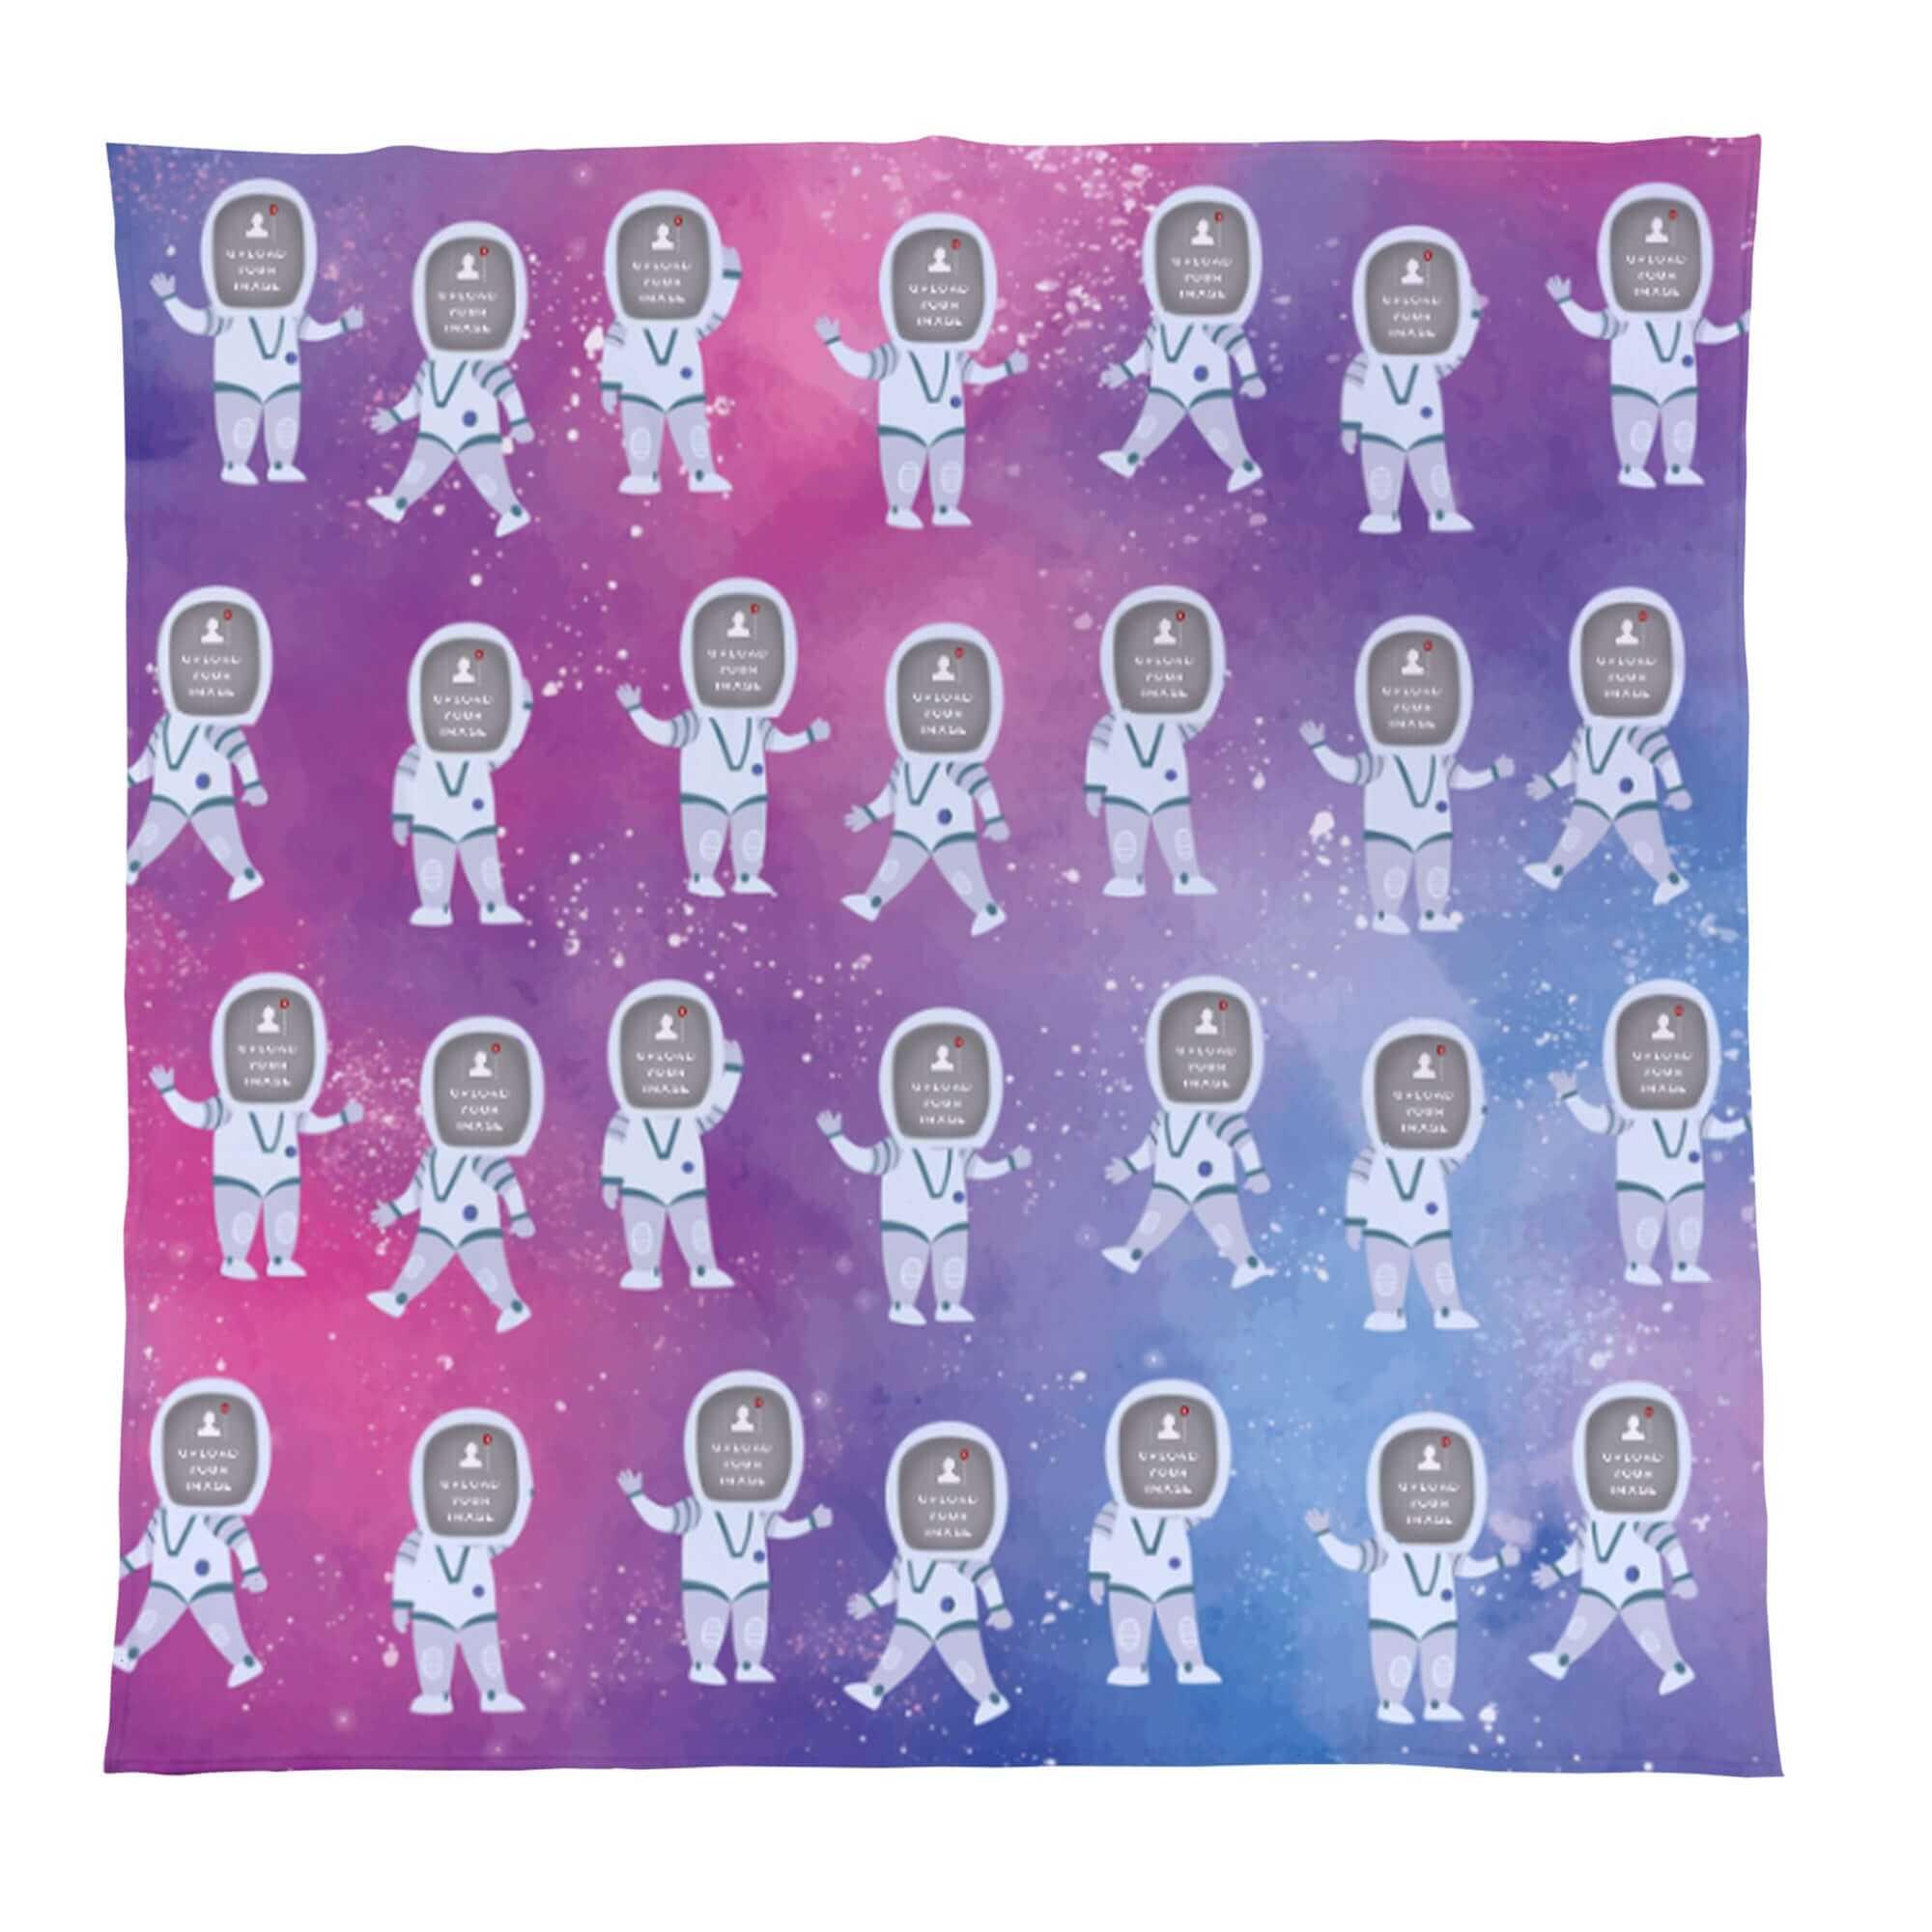 Astronaut personalised photo Face blanket